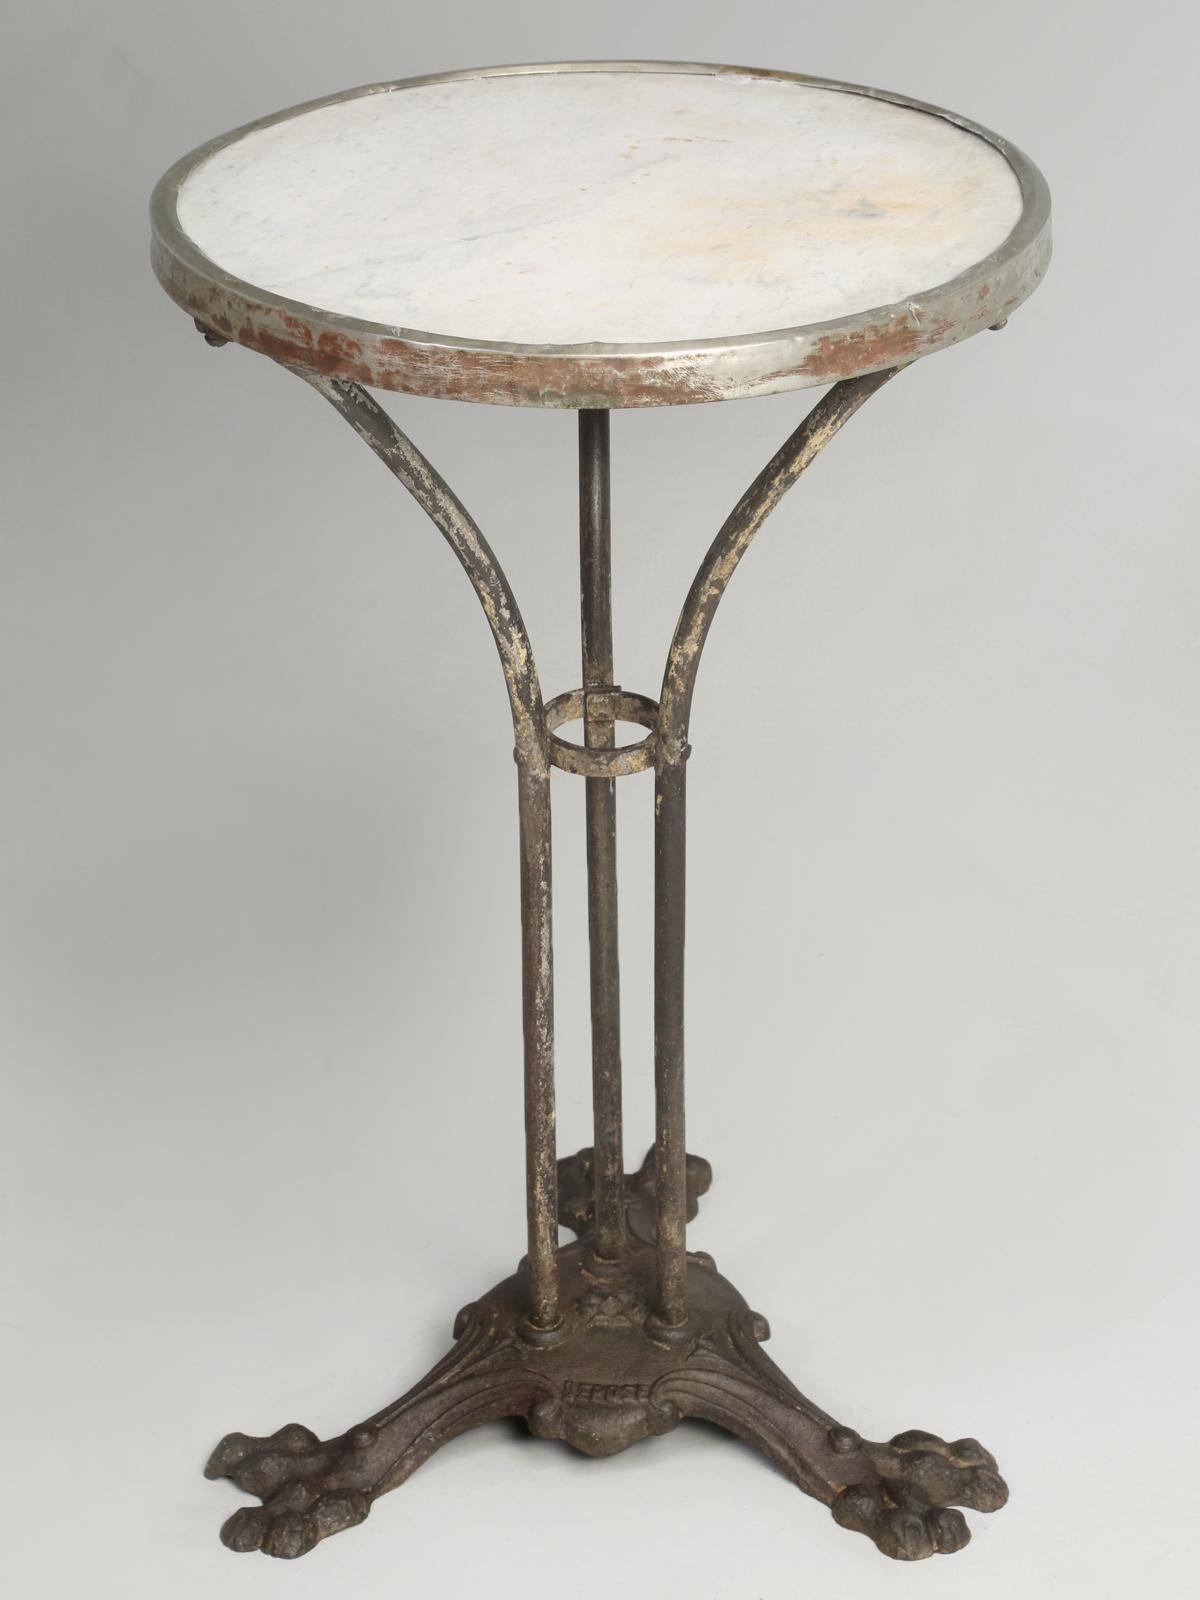 This is a well used Bistro table with excessive patina and if you are looking for a pristine example of an antique French Bistro table, then this marble and iron Bistro table is not for you. The Bistro table is structurally sound and as we described